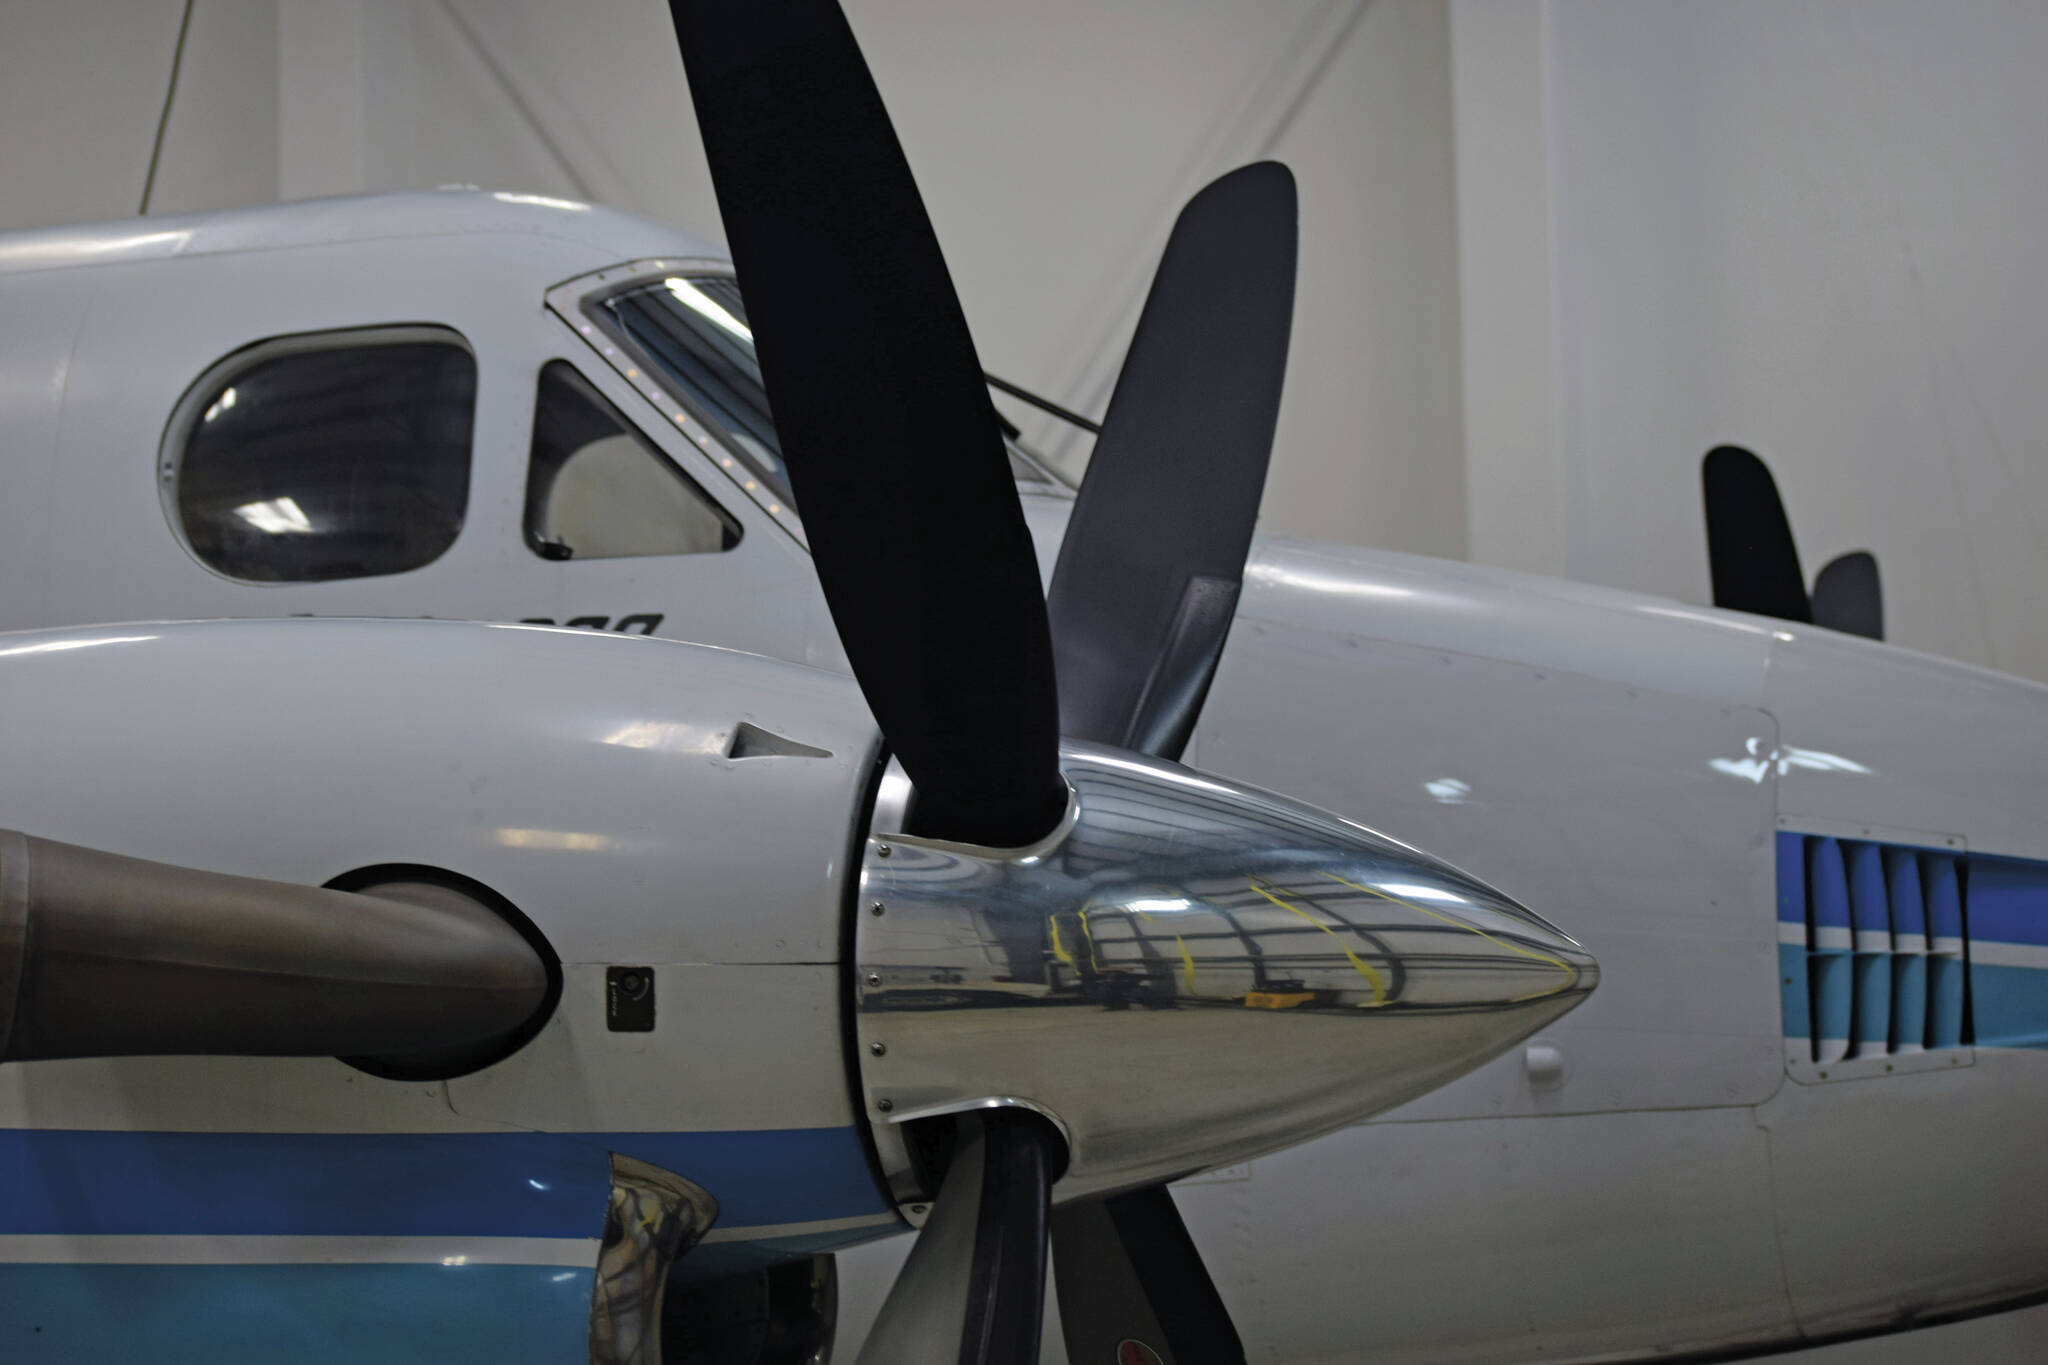 A nine-seat Beechcrafter Super King Air B200 plane sits in a hanger at Kenai Aviation in Kenai, Alaska, on Wednesday, March 9, 2022. (Camille Botello/Peninsula Clarion)